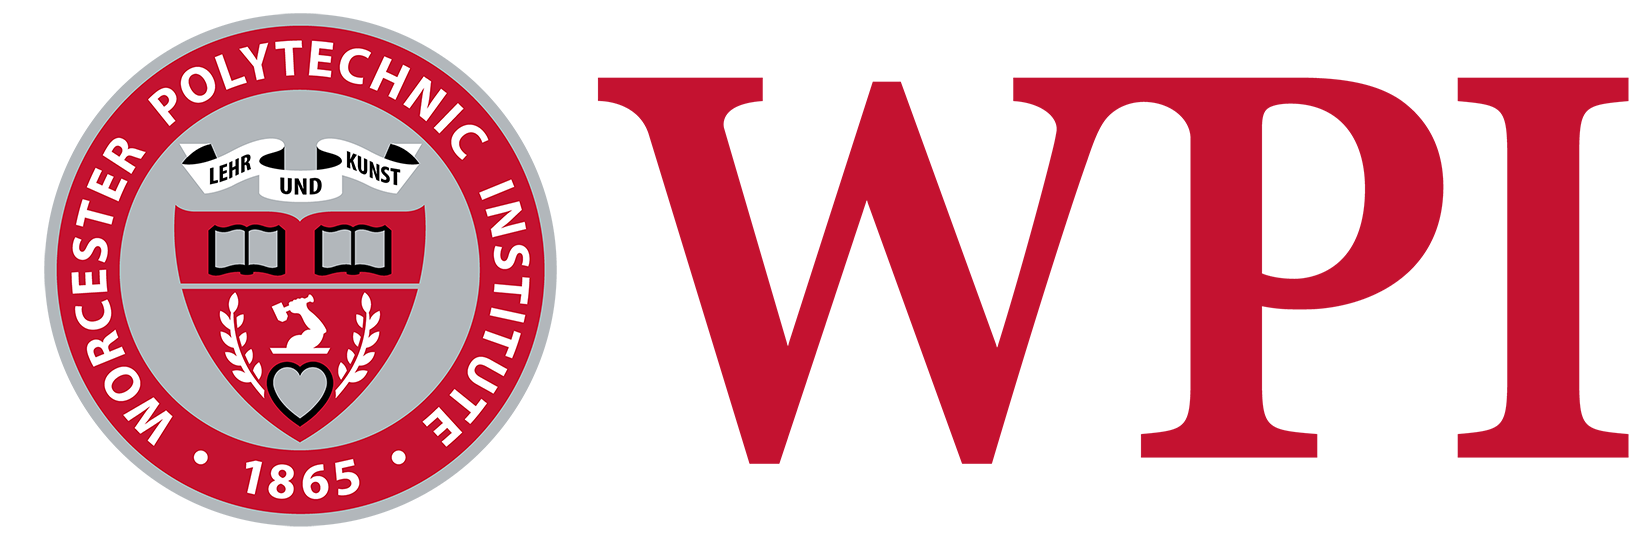 WPI Logo in red with color seal